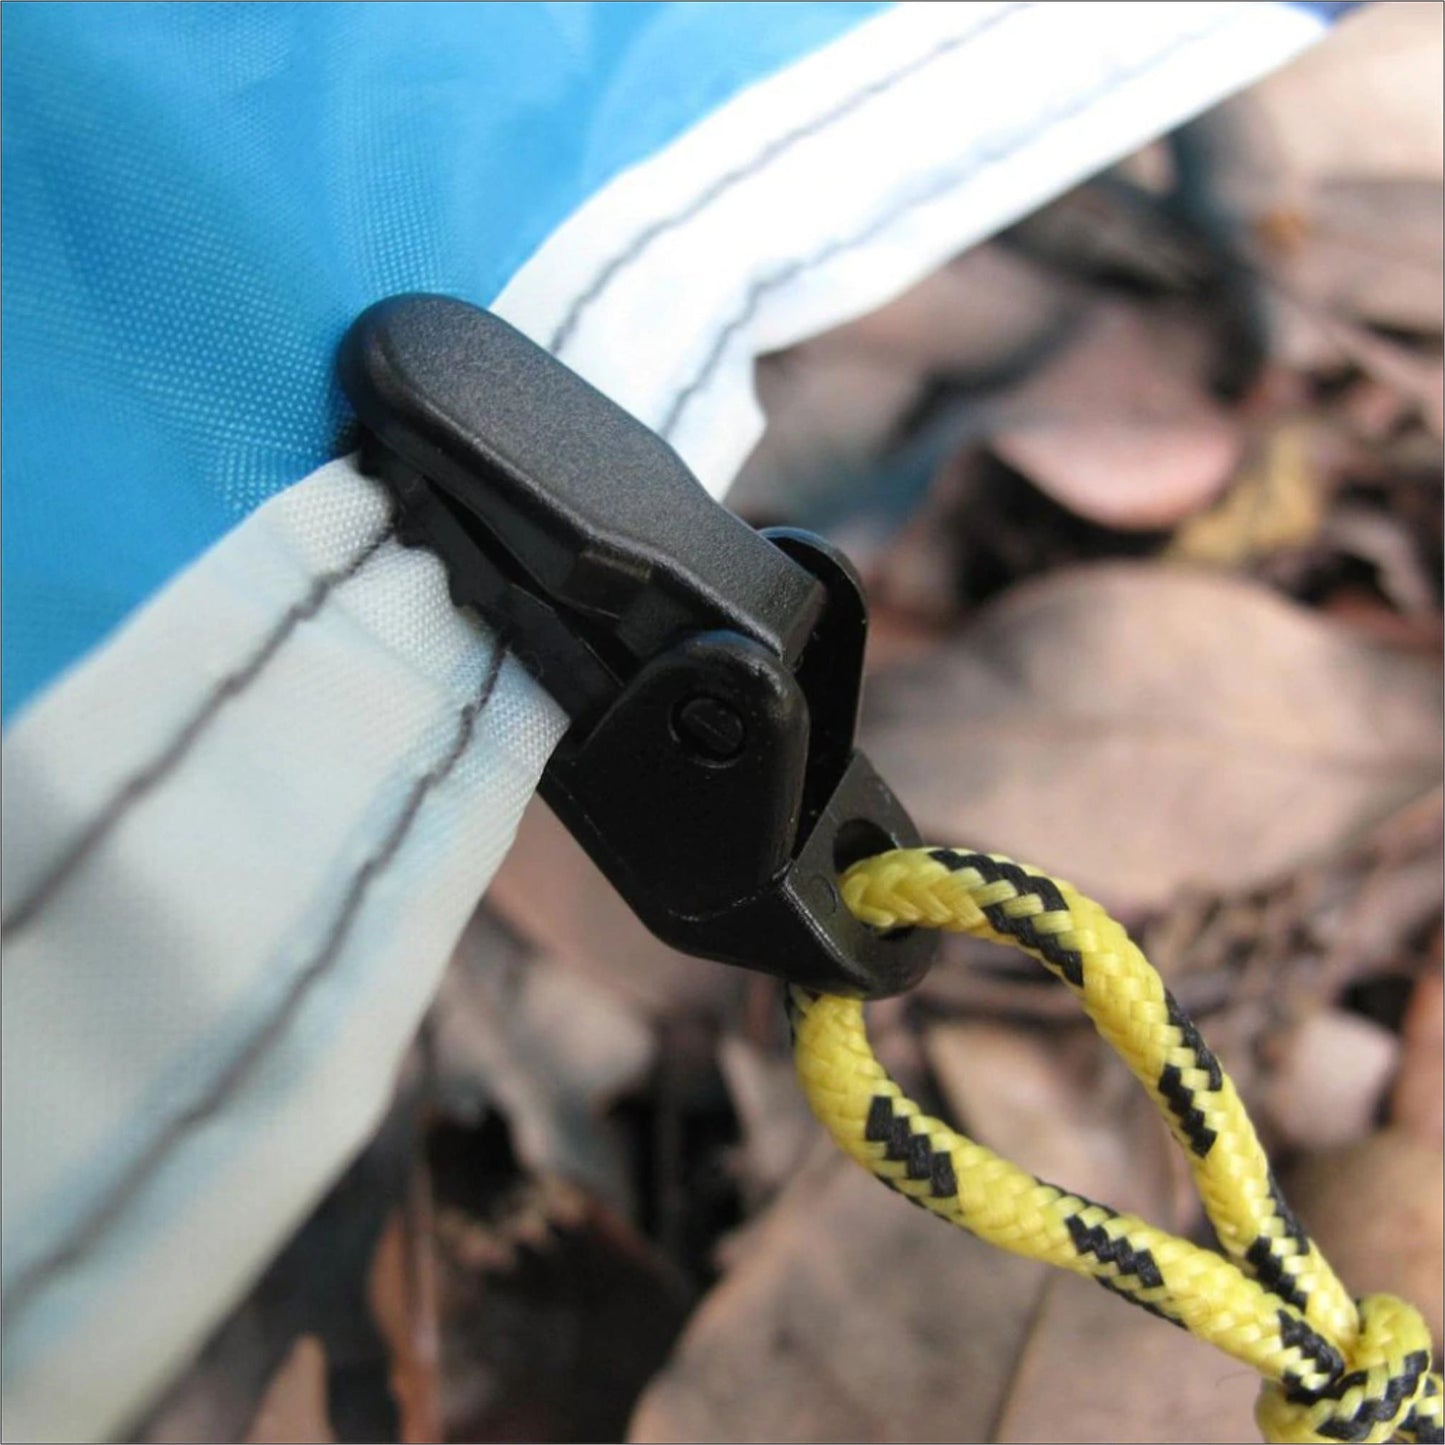 10Pcs tent awning canopy clip tarp canvas clamp clip snap anchor gripper tightener tool